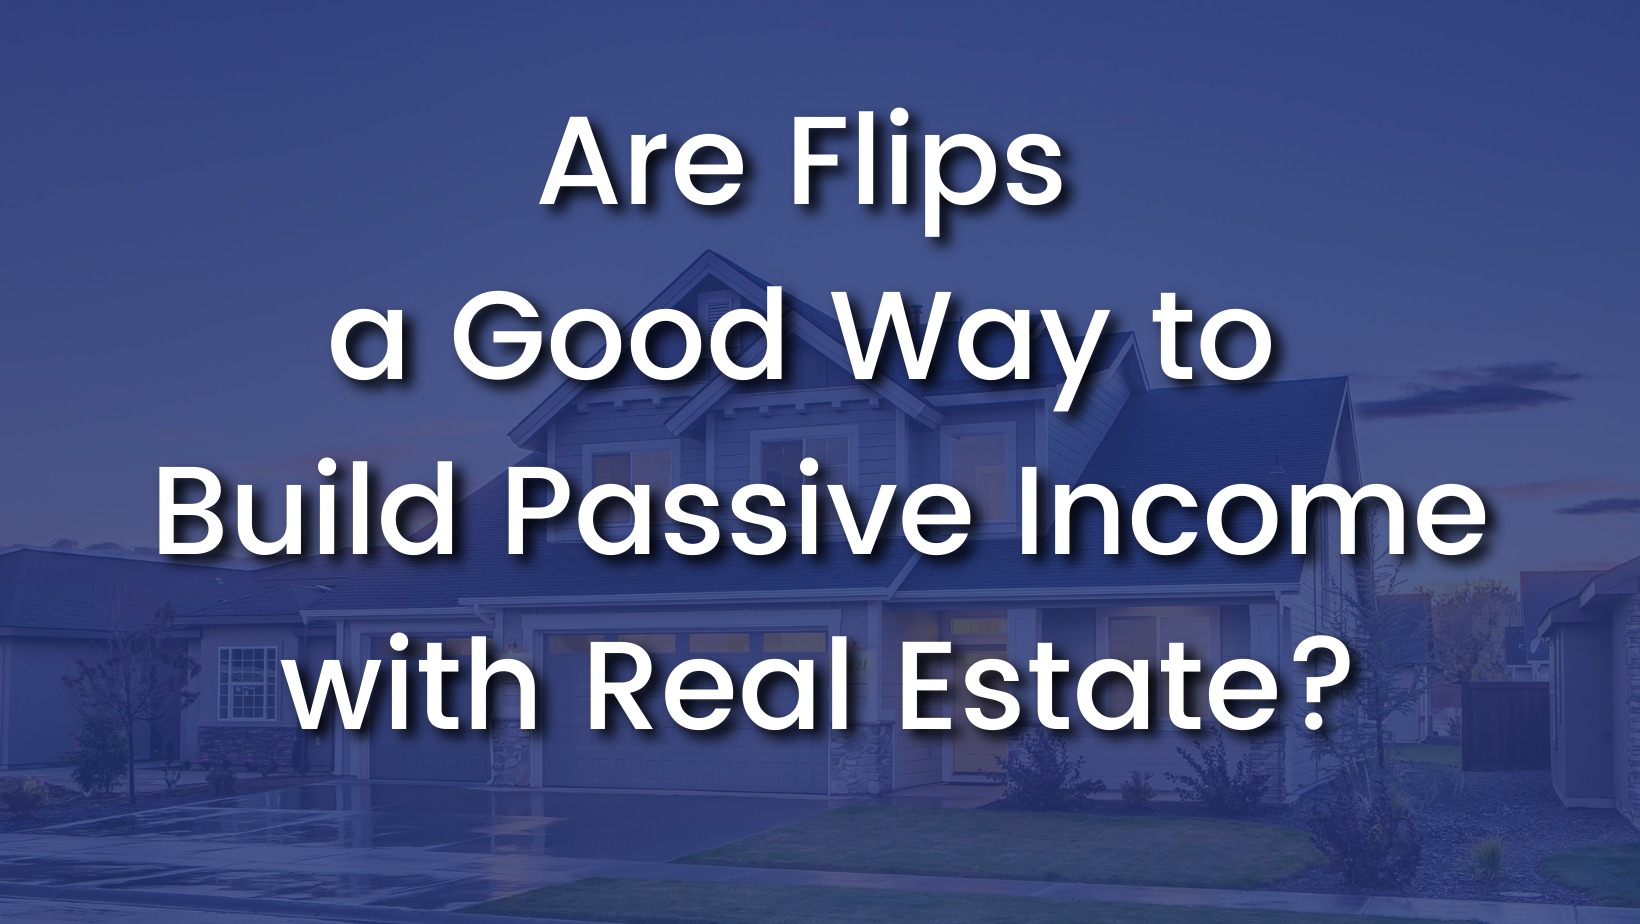 Are Flips a Good Way to Build Passive Income with Real Estate